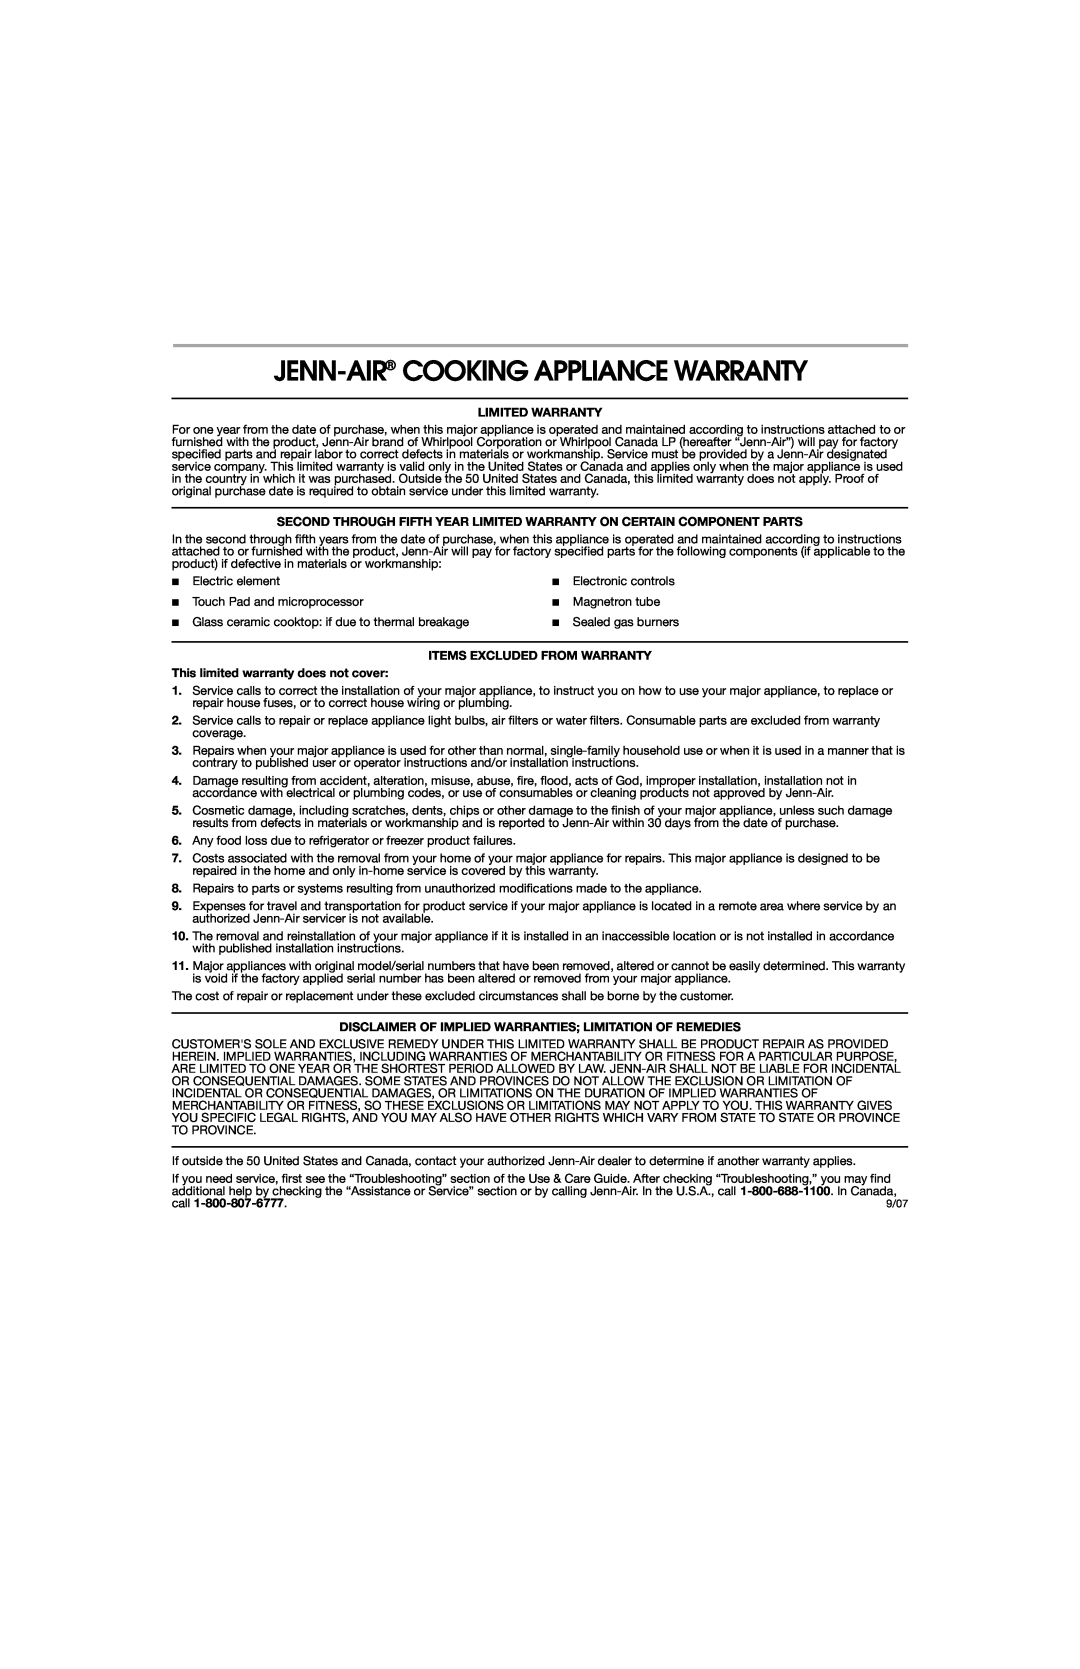 Jenn-Air 8113P757-60 Jenn-Air Cooking Appliance Warranty, Limited Warranty, Items Excluded From Warranty, call 